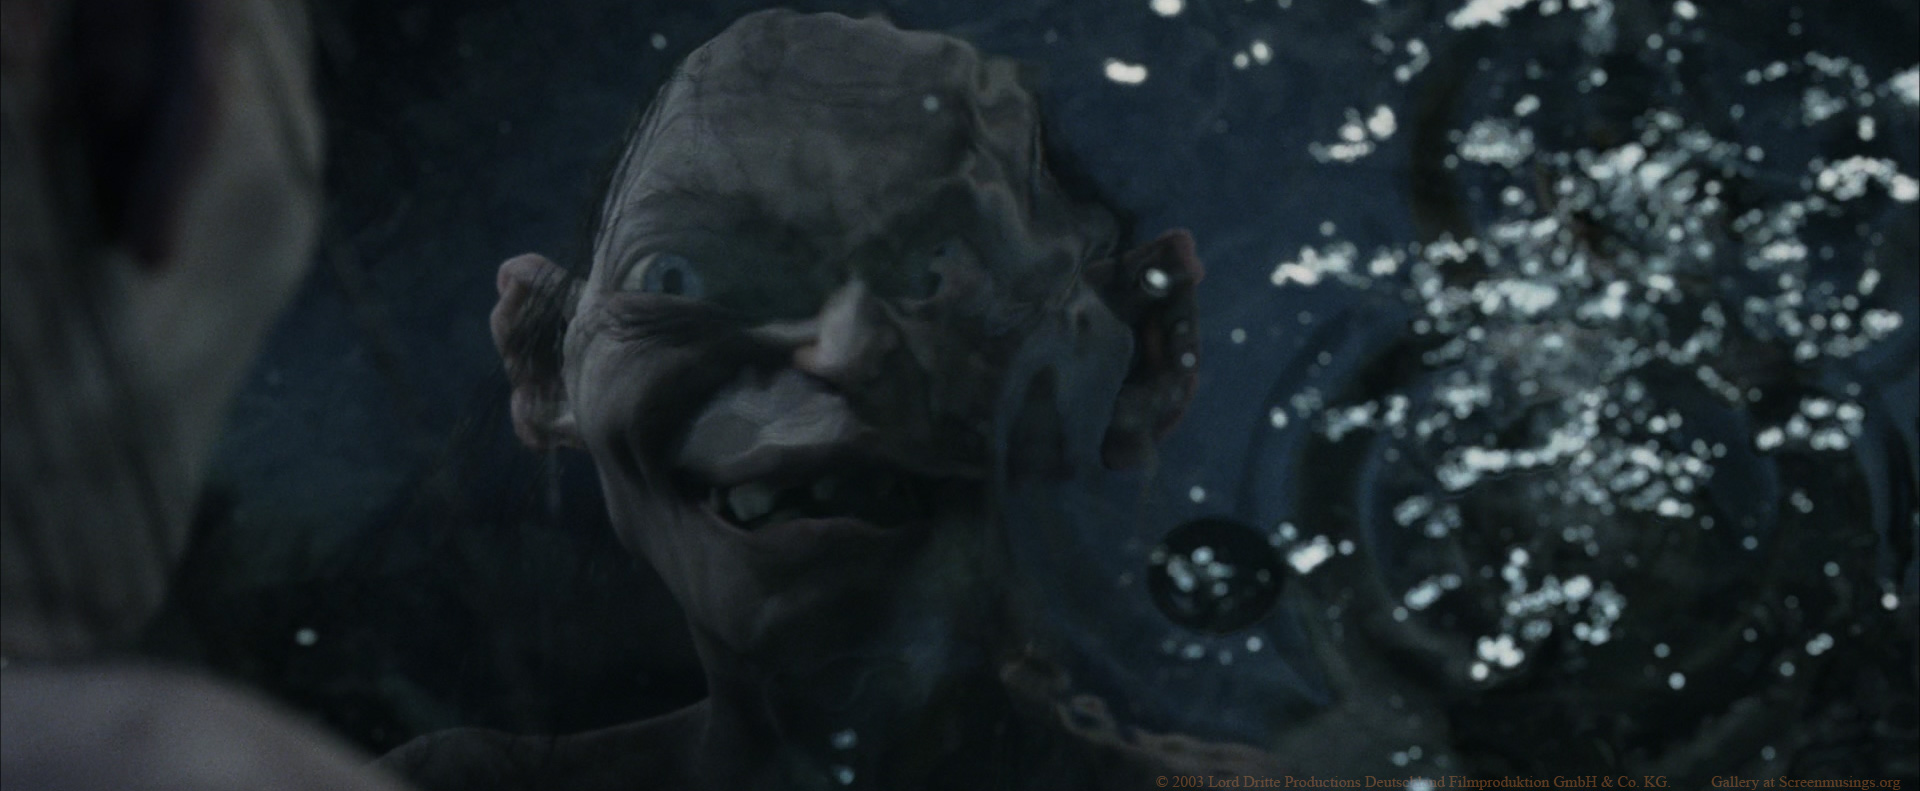 the lord of the rings return of the king gollum share